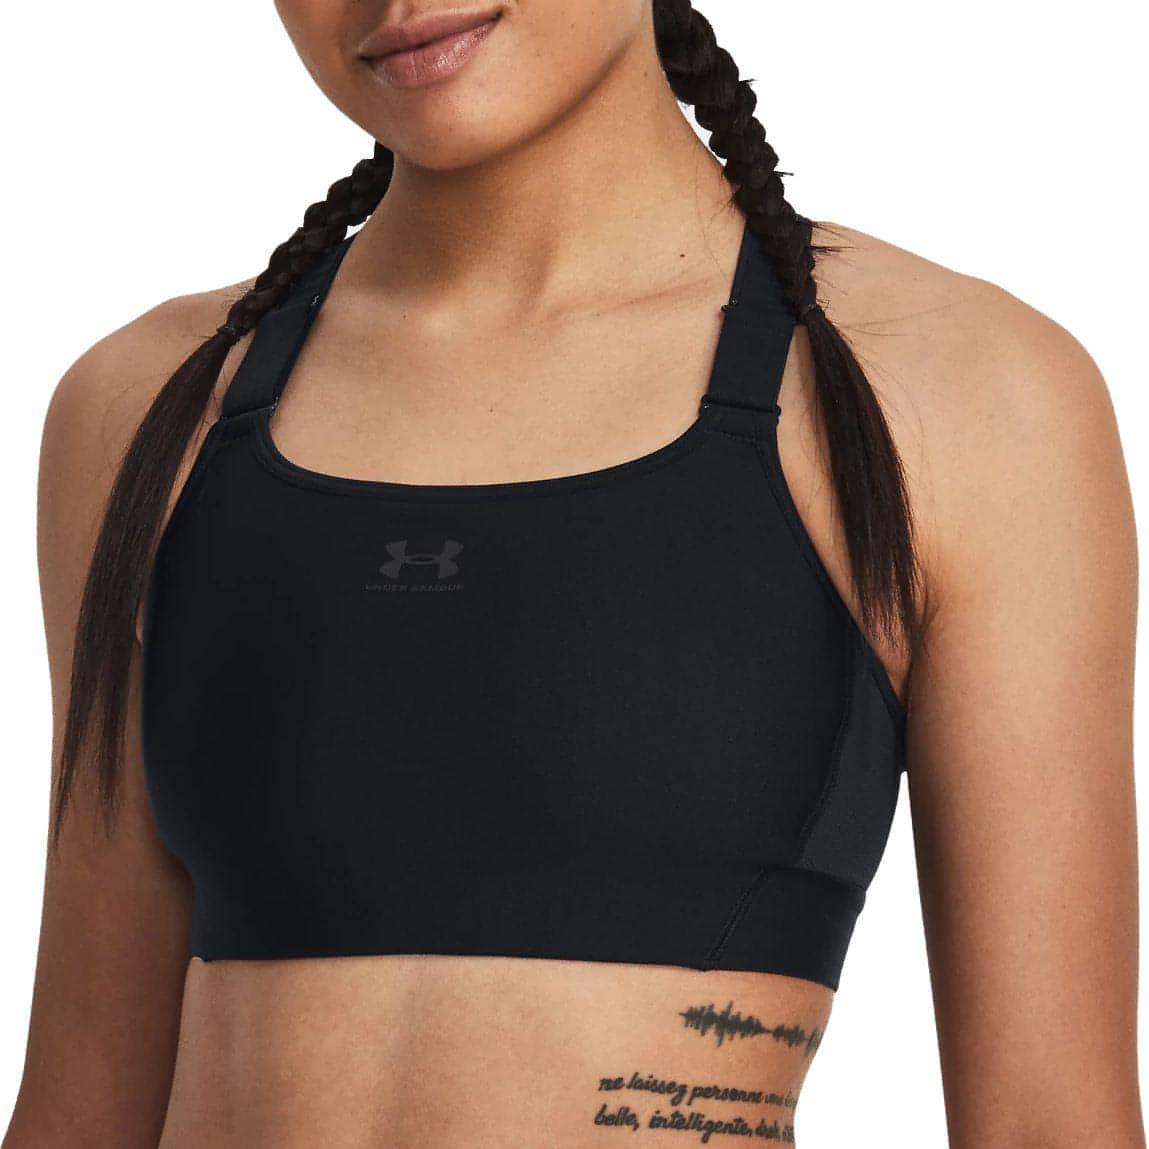 Under Armour to introduce new sports bra collection